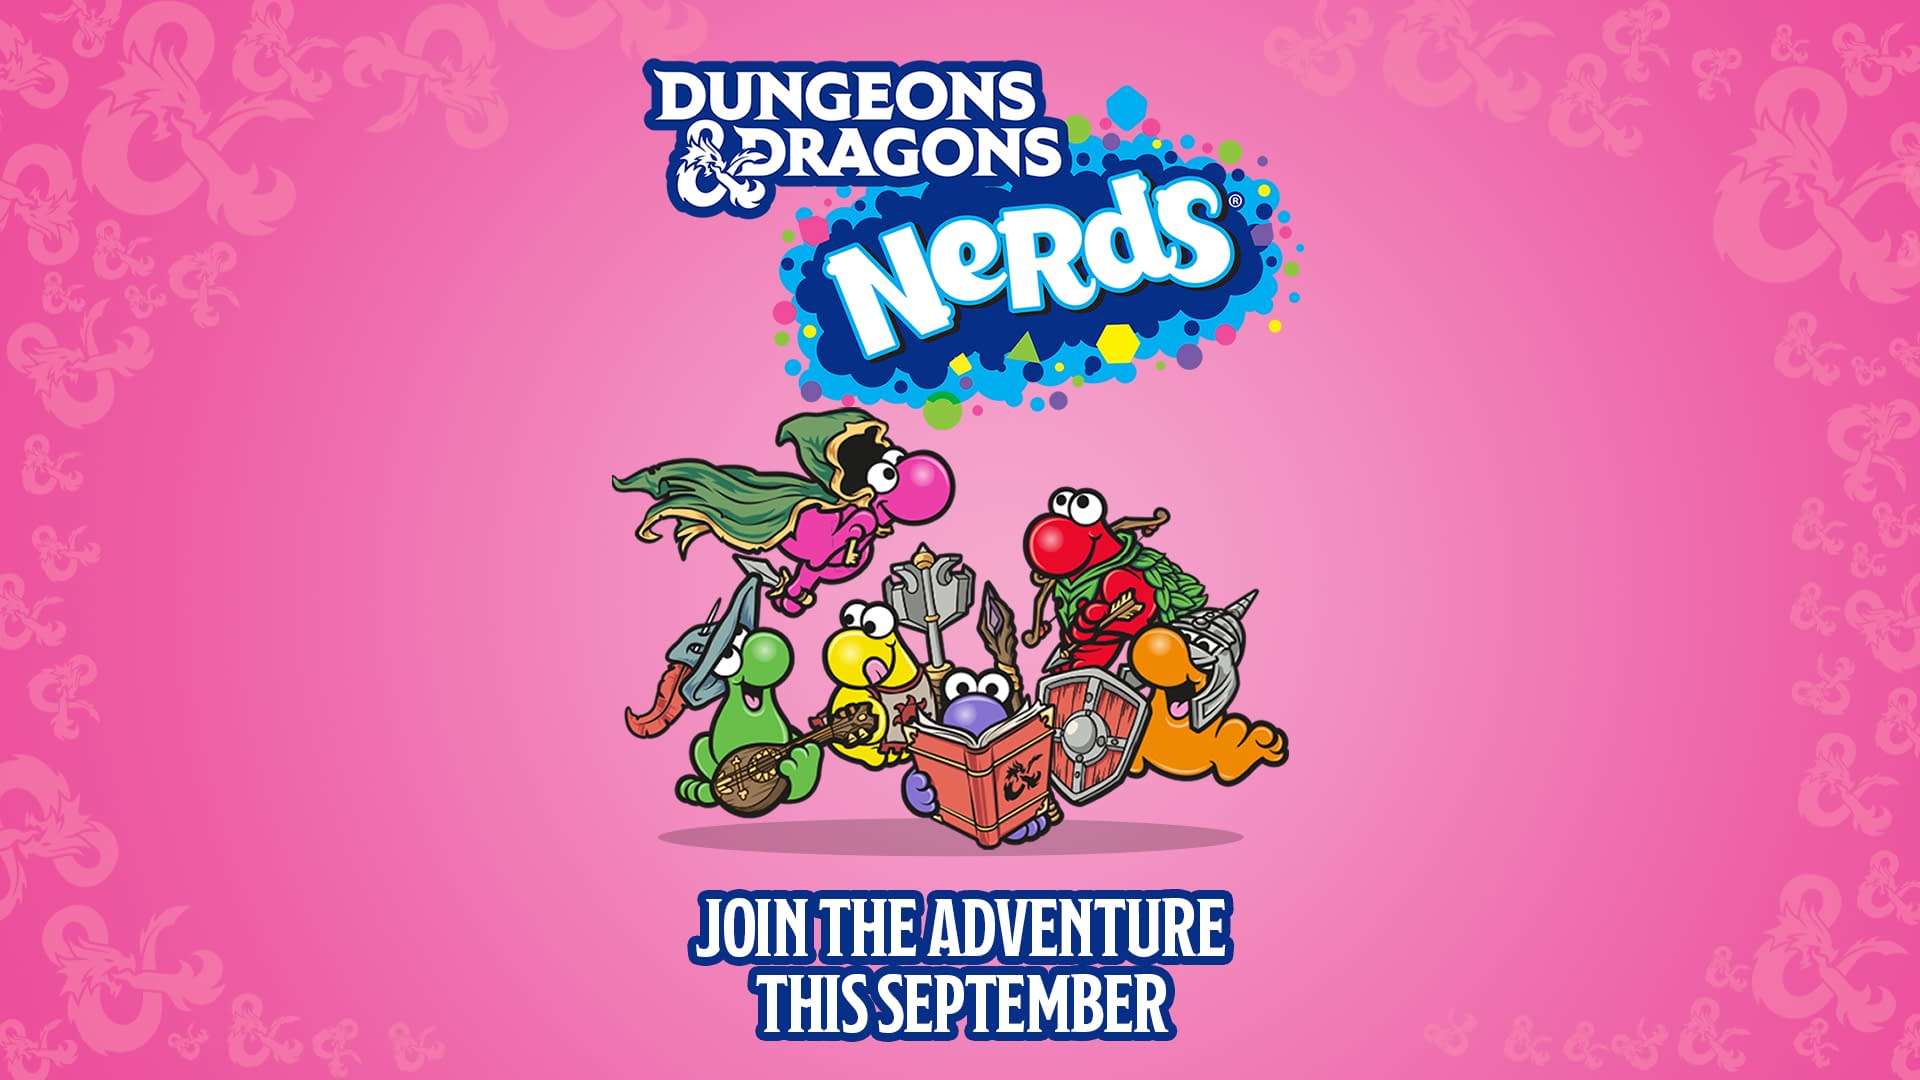 Nerds Candy aligns with Dungeons & Dragons for epic collab, 2021-09-01